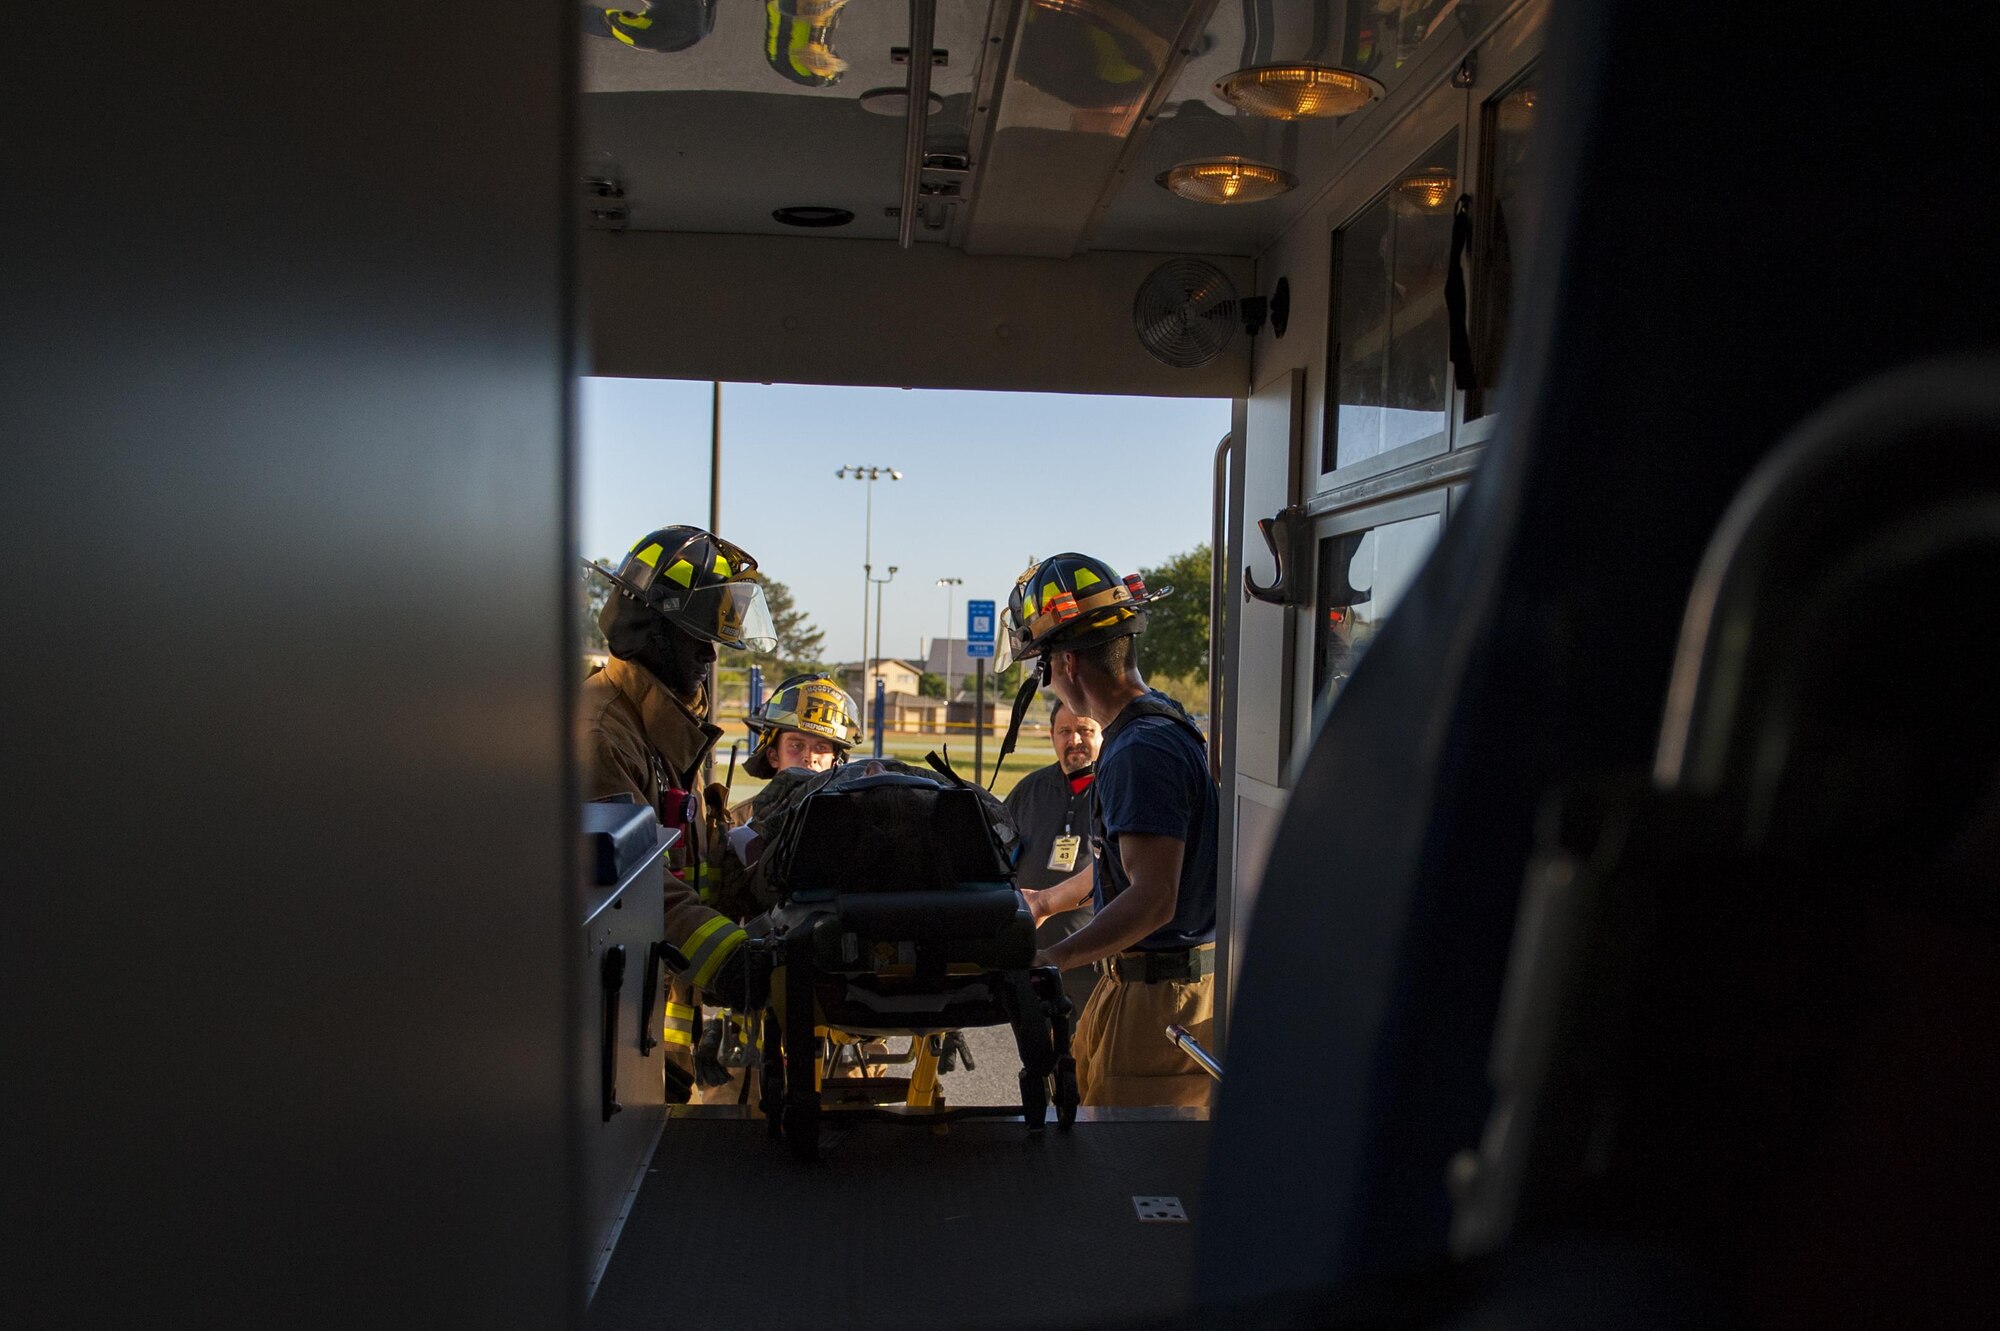 Moody firefighters lift a stimulated victim into an ambulance, April 19, 2017, at Moody Air Force Base, Ga. The exercise tested the wing’s ability to evacuate aircraft, secure assets and respond to emergency situations in the event of a real-world natural disaster. (U.S. Air Force photo by Airman 1st Class Lauren M. Sprunk)